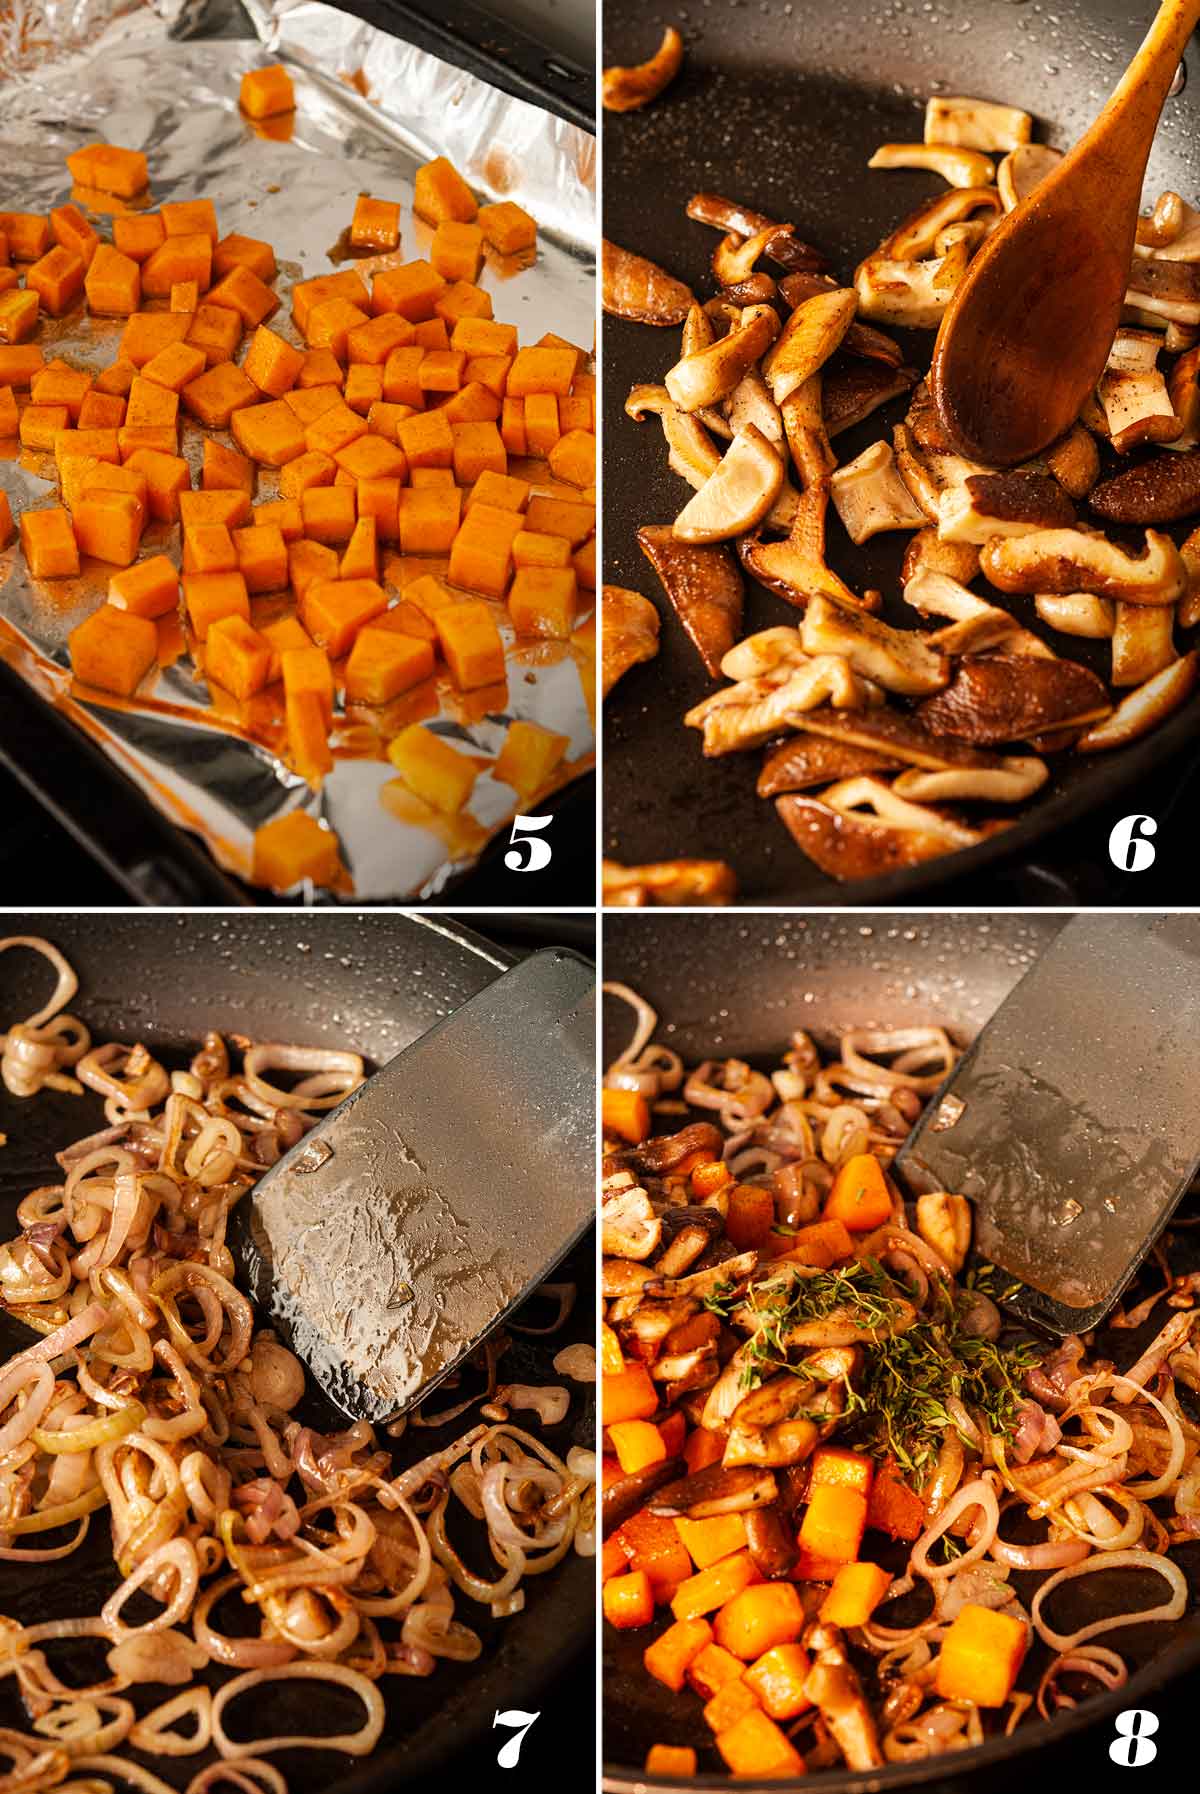 A collage of 4 numbered images showing how to cook vegitables.